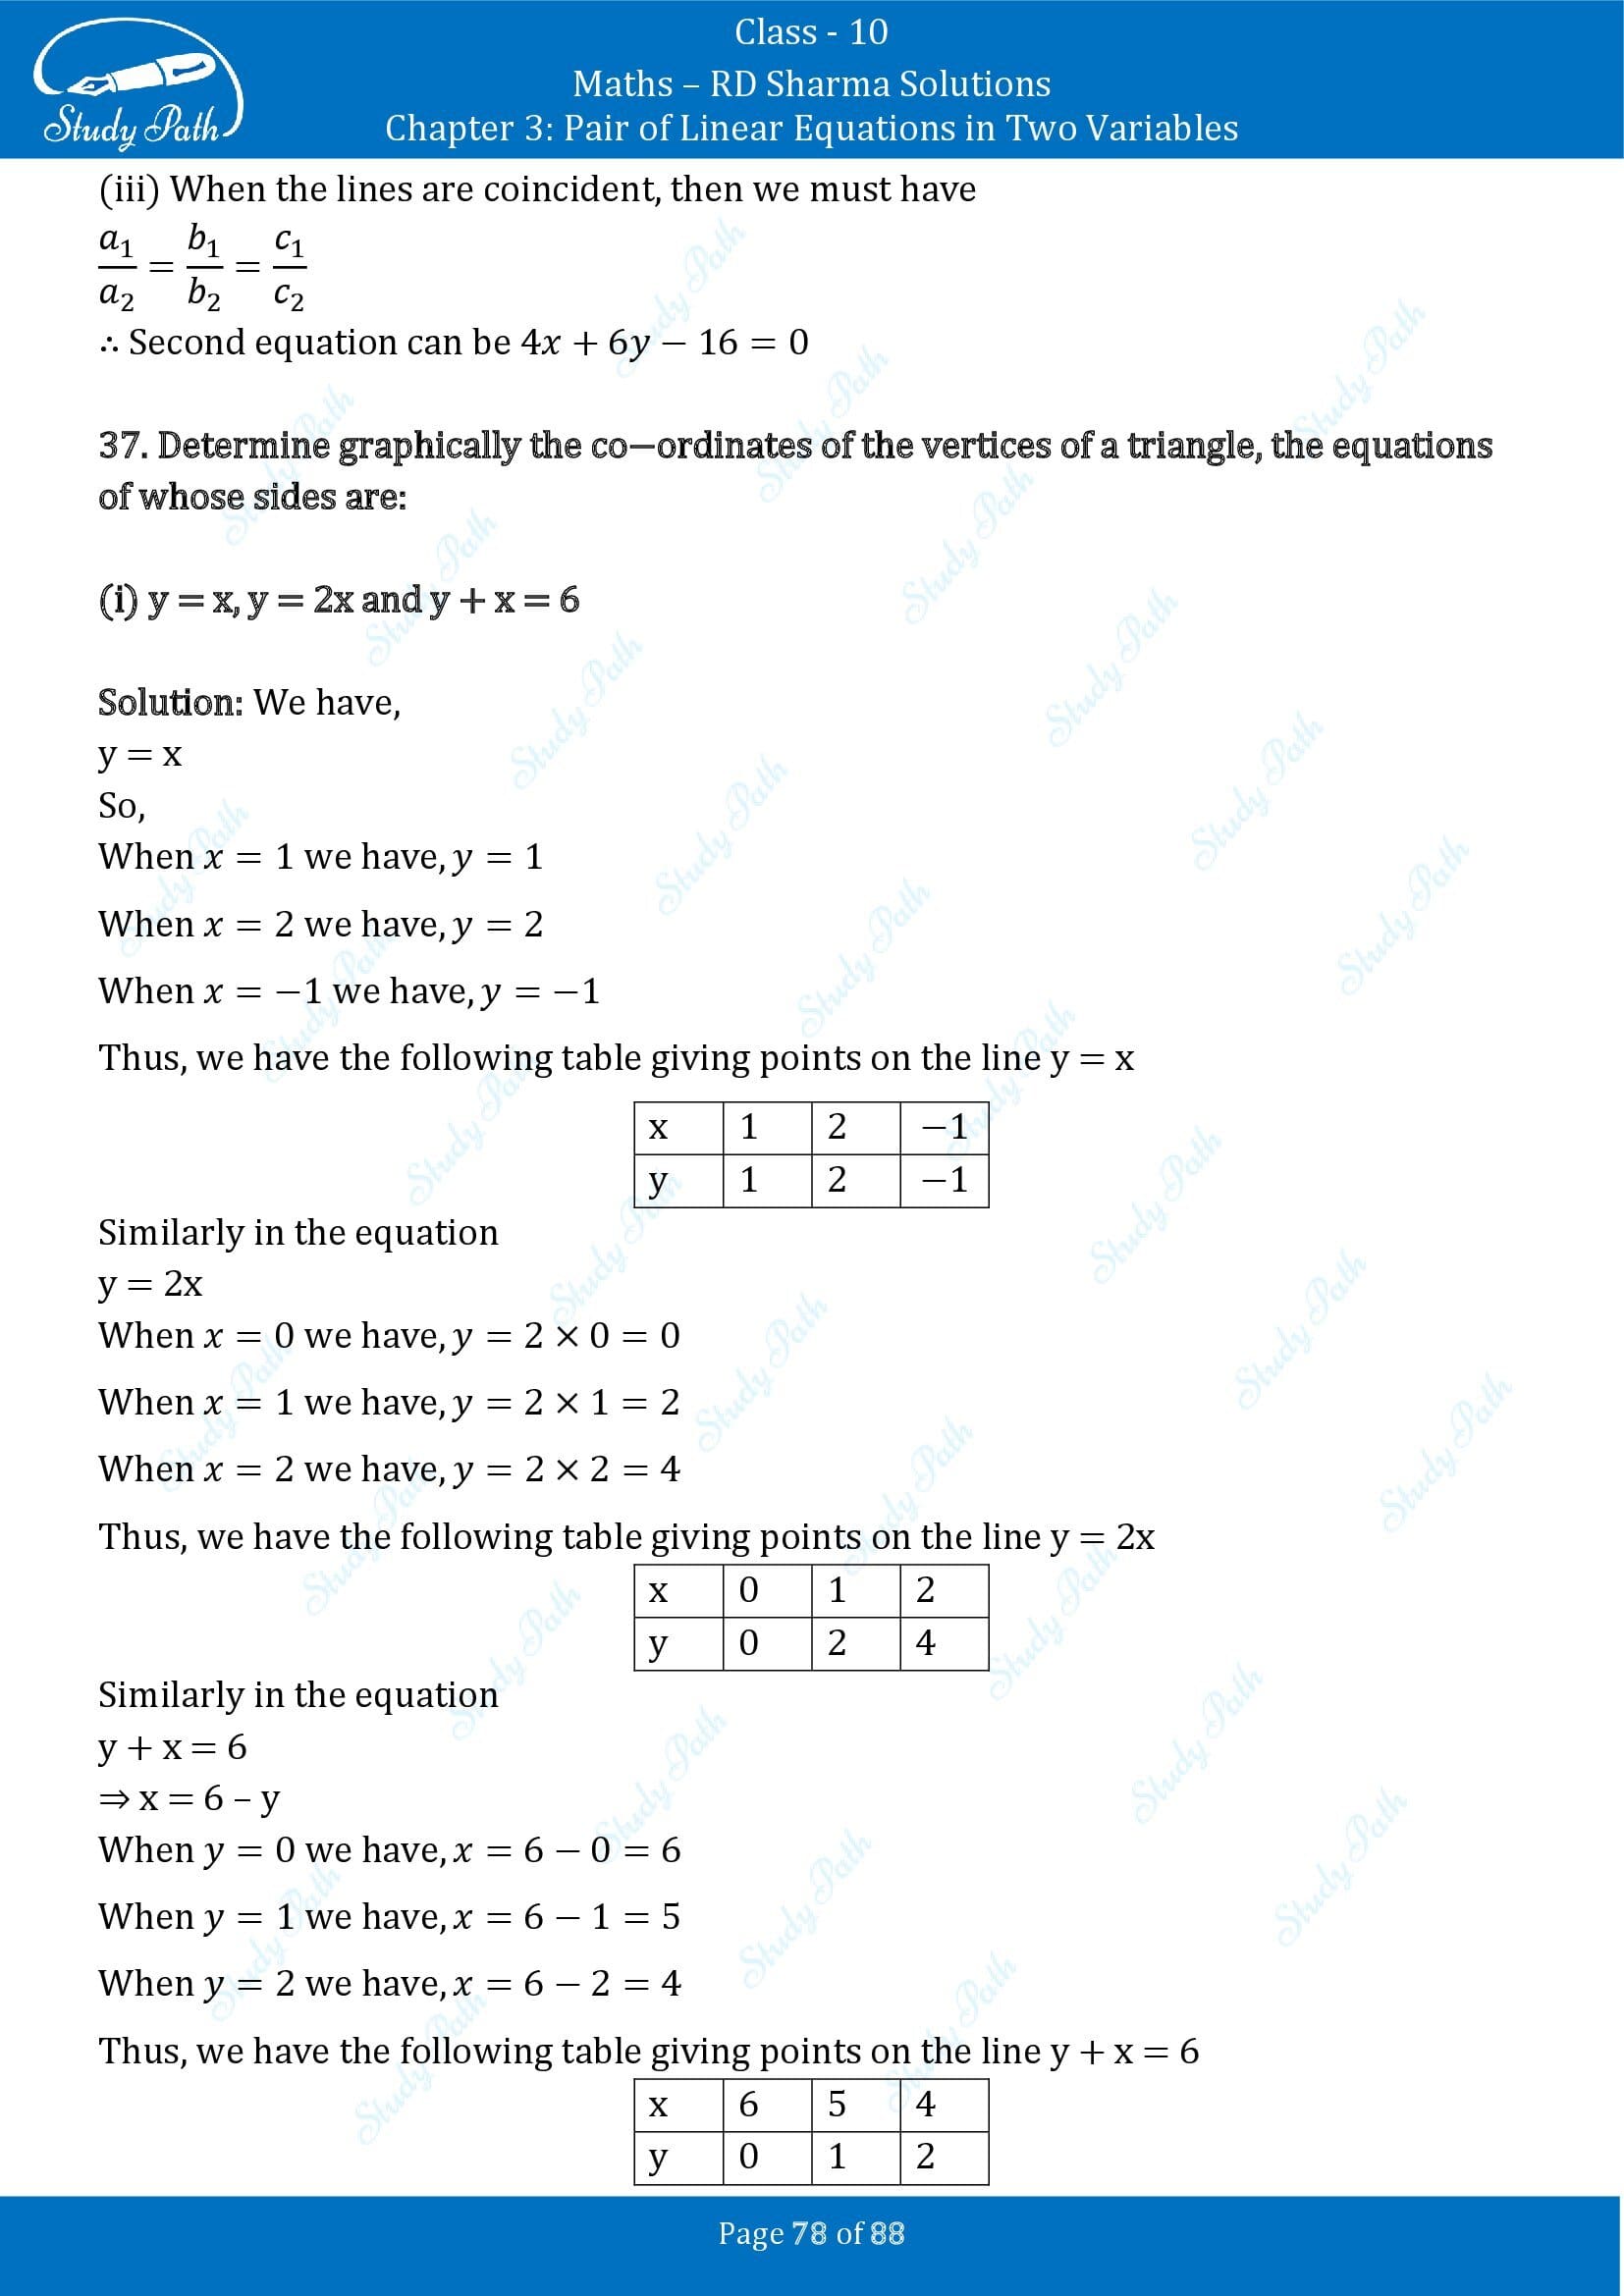 RD Sharma Solutions Class 10 Chapter 3 Pair of Linear Equations in Two Variables Exercise 3.2 00078